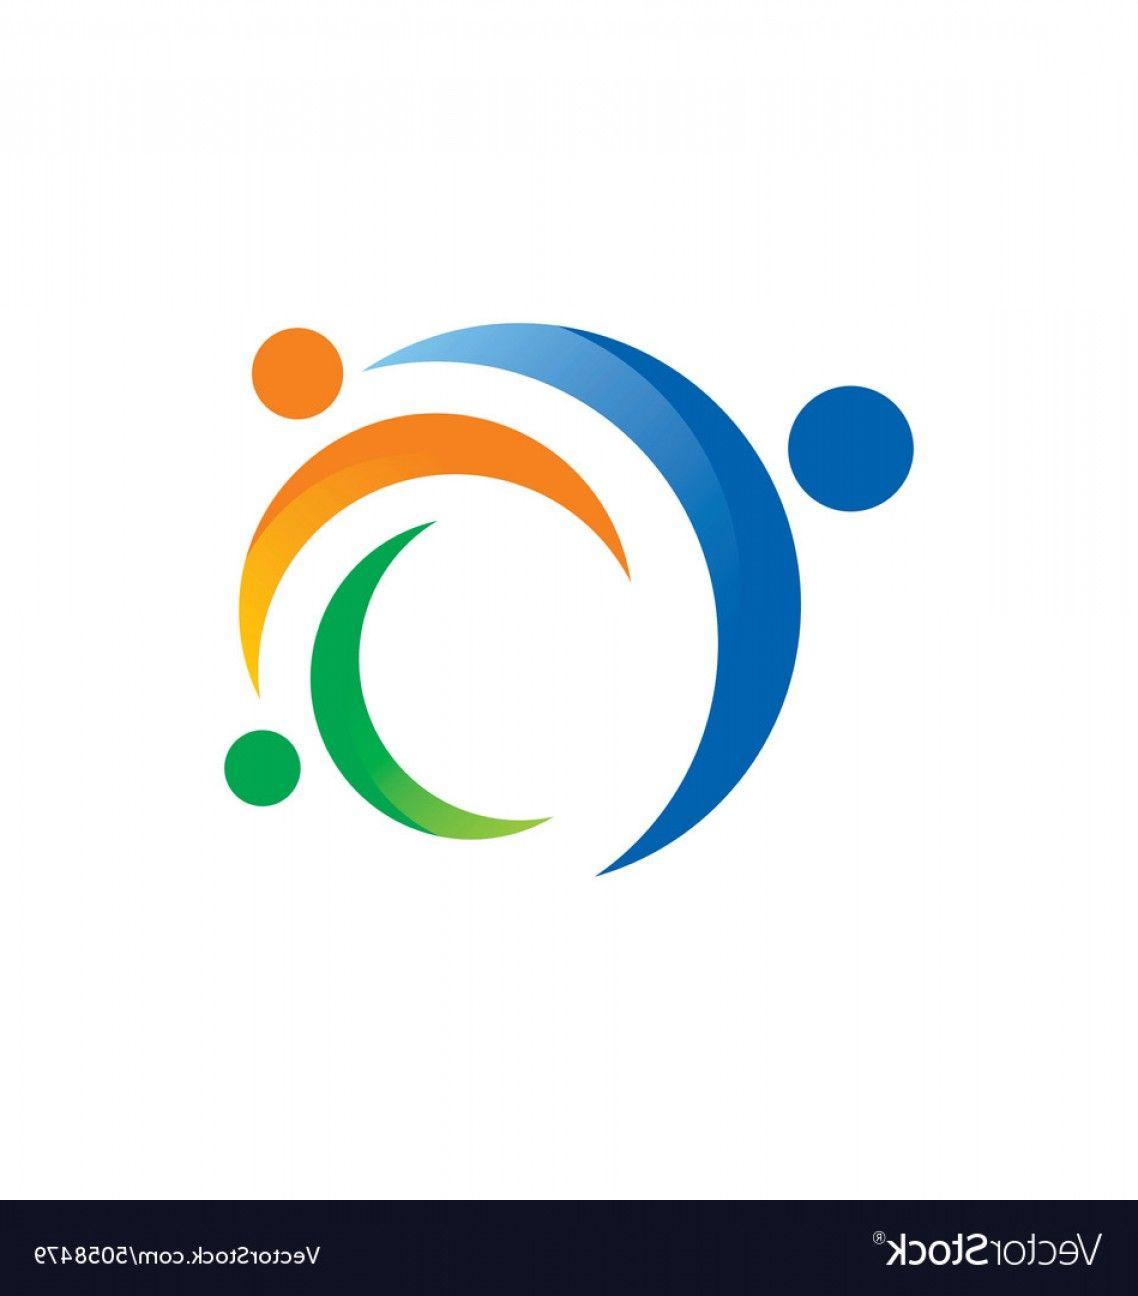 Blue and Orange Circle People Logo - People Circle Connection Group Logo Vector